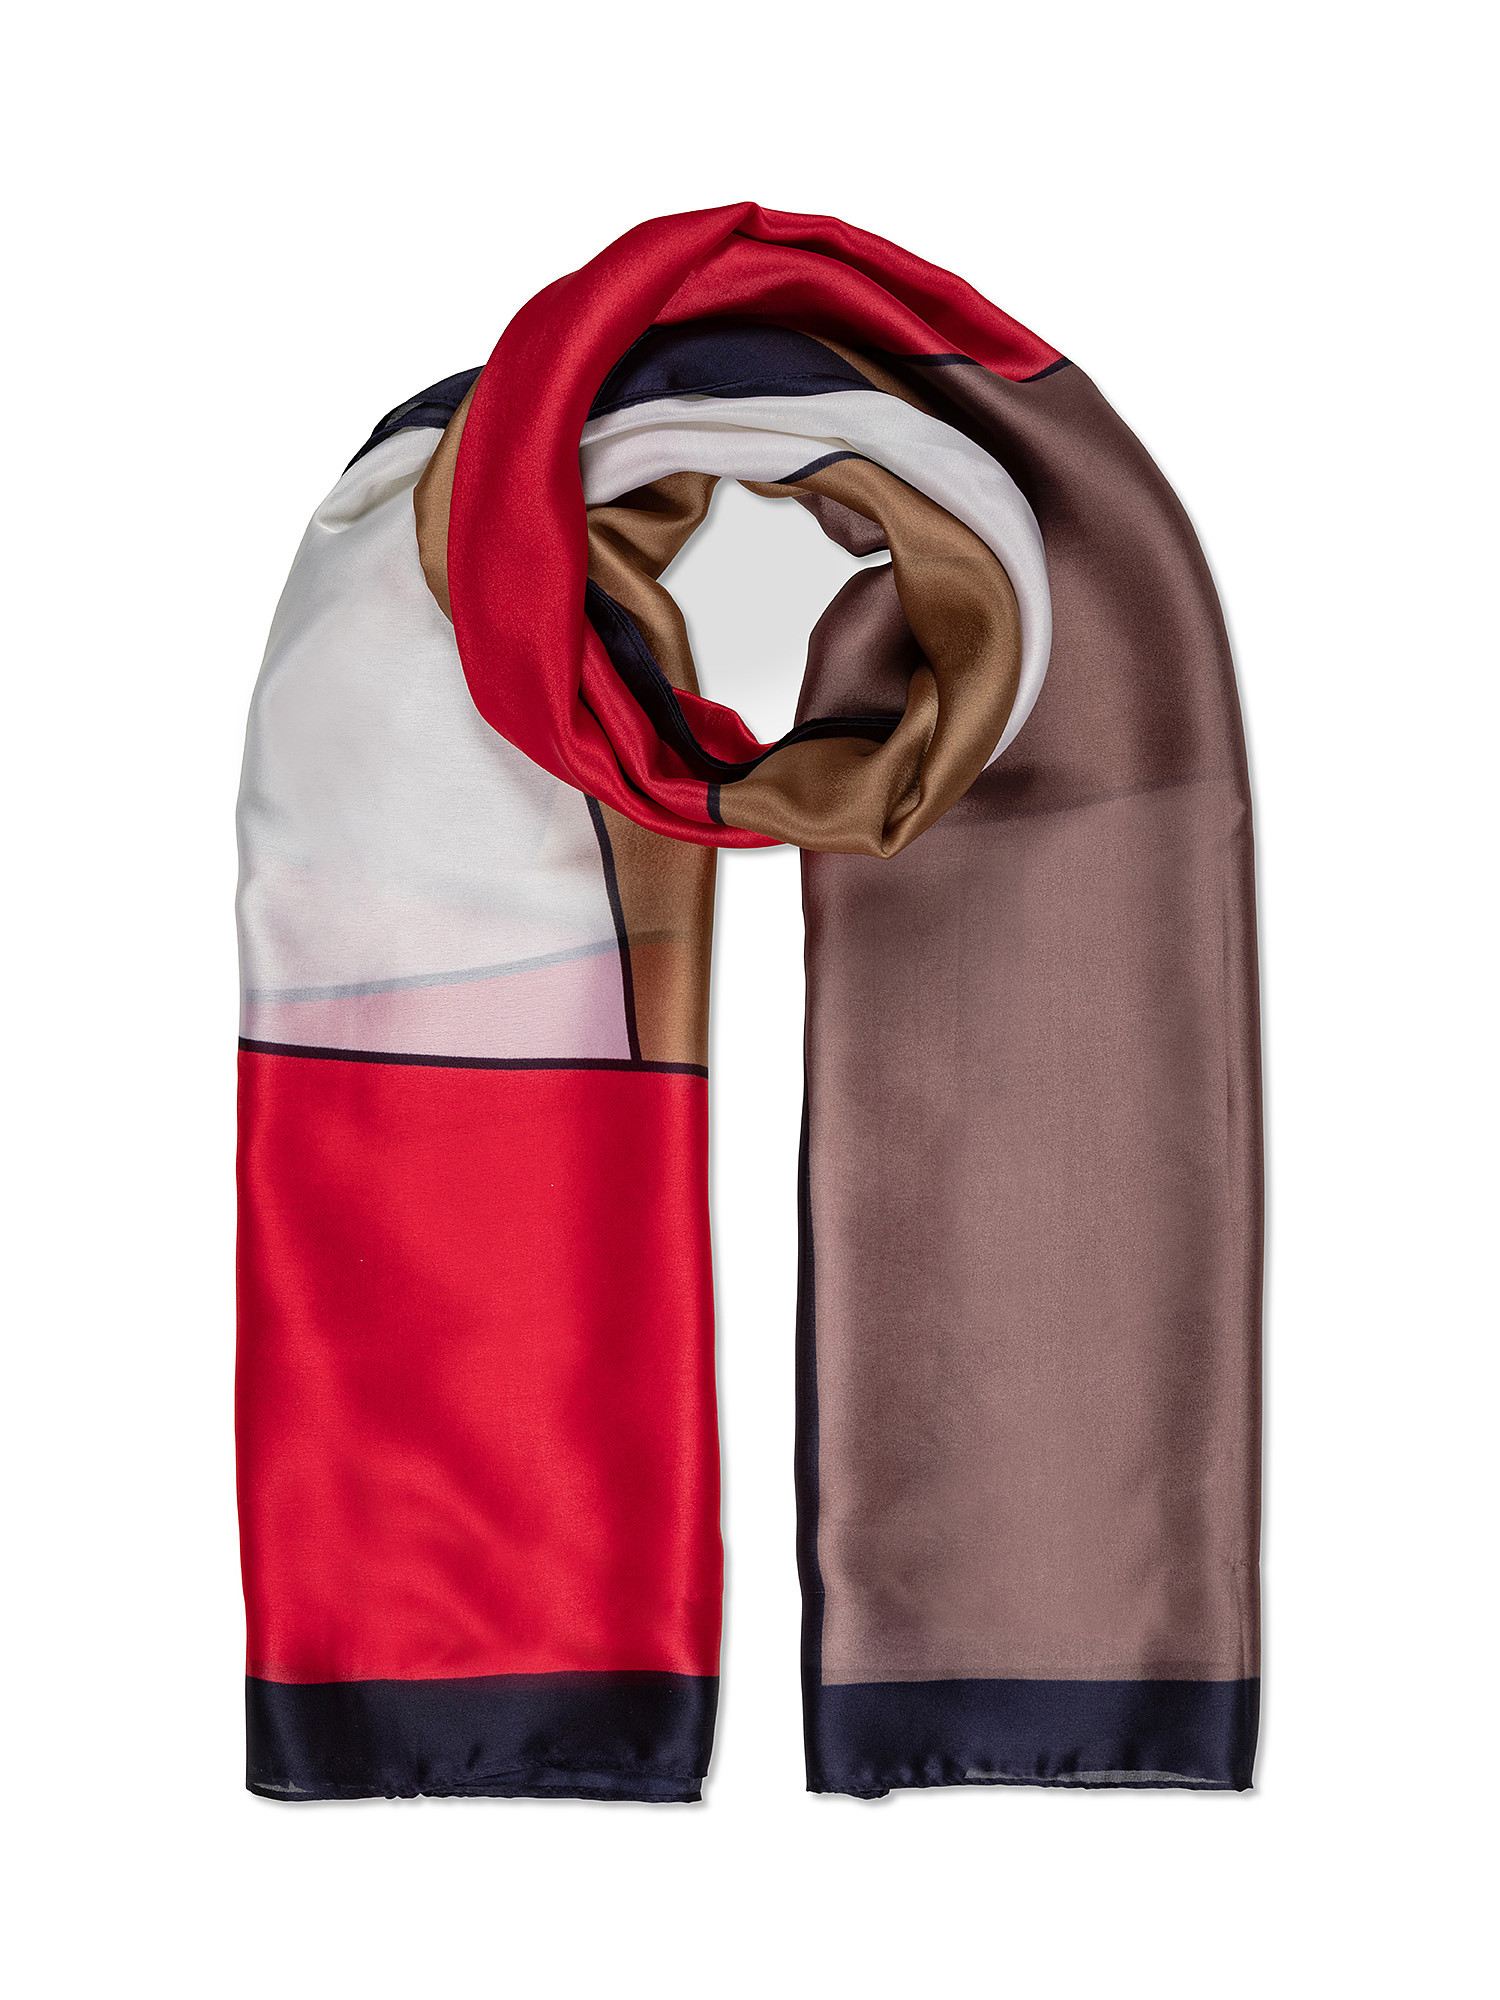 Koan - Scarf with print, Multicolor, large image number 0